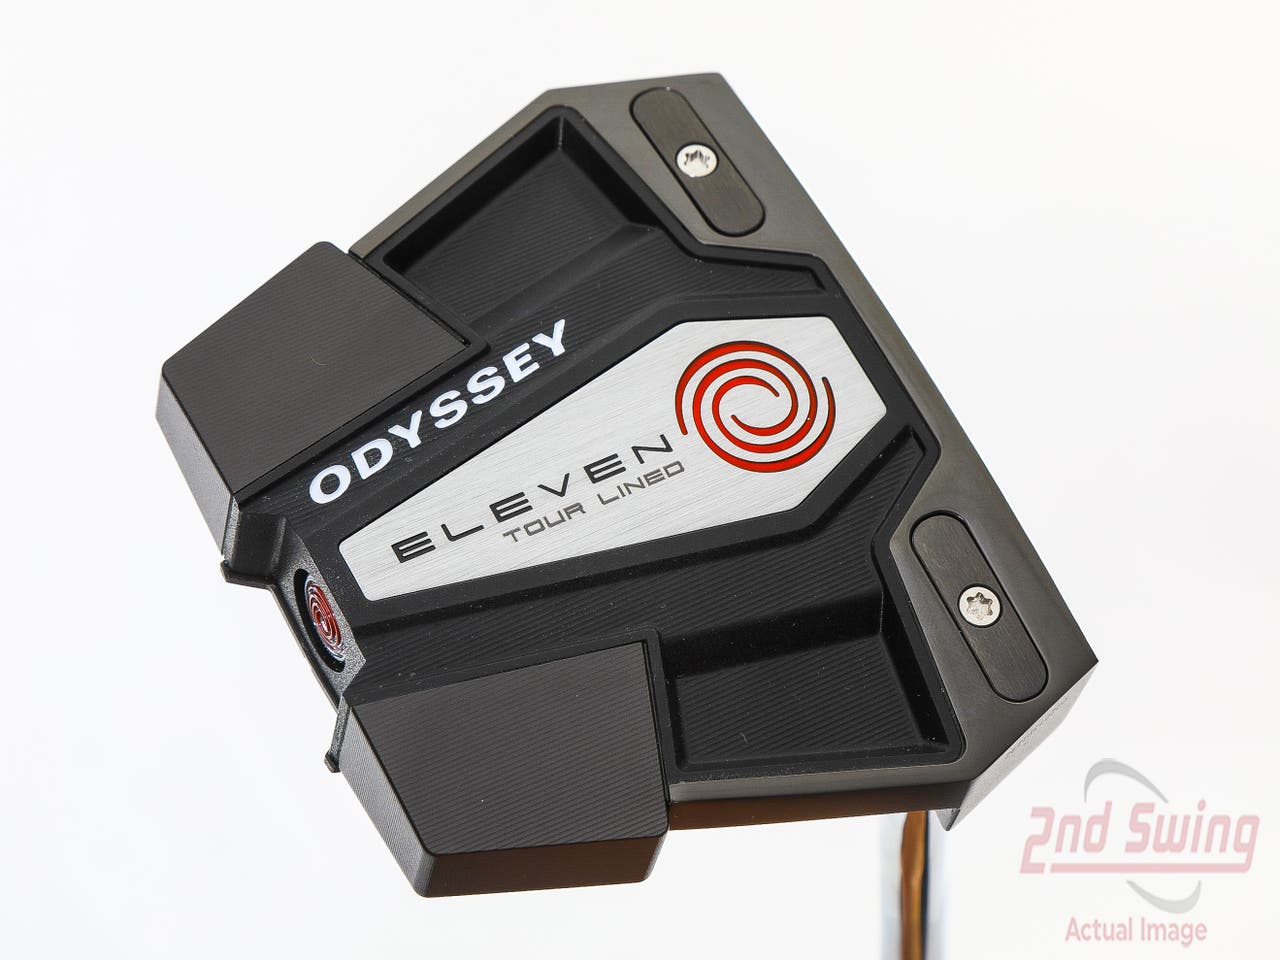 Mint Odyssey Eleven Tour Lined DB Putter Steel Right Handed 34.0in